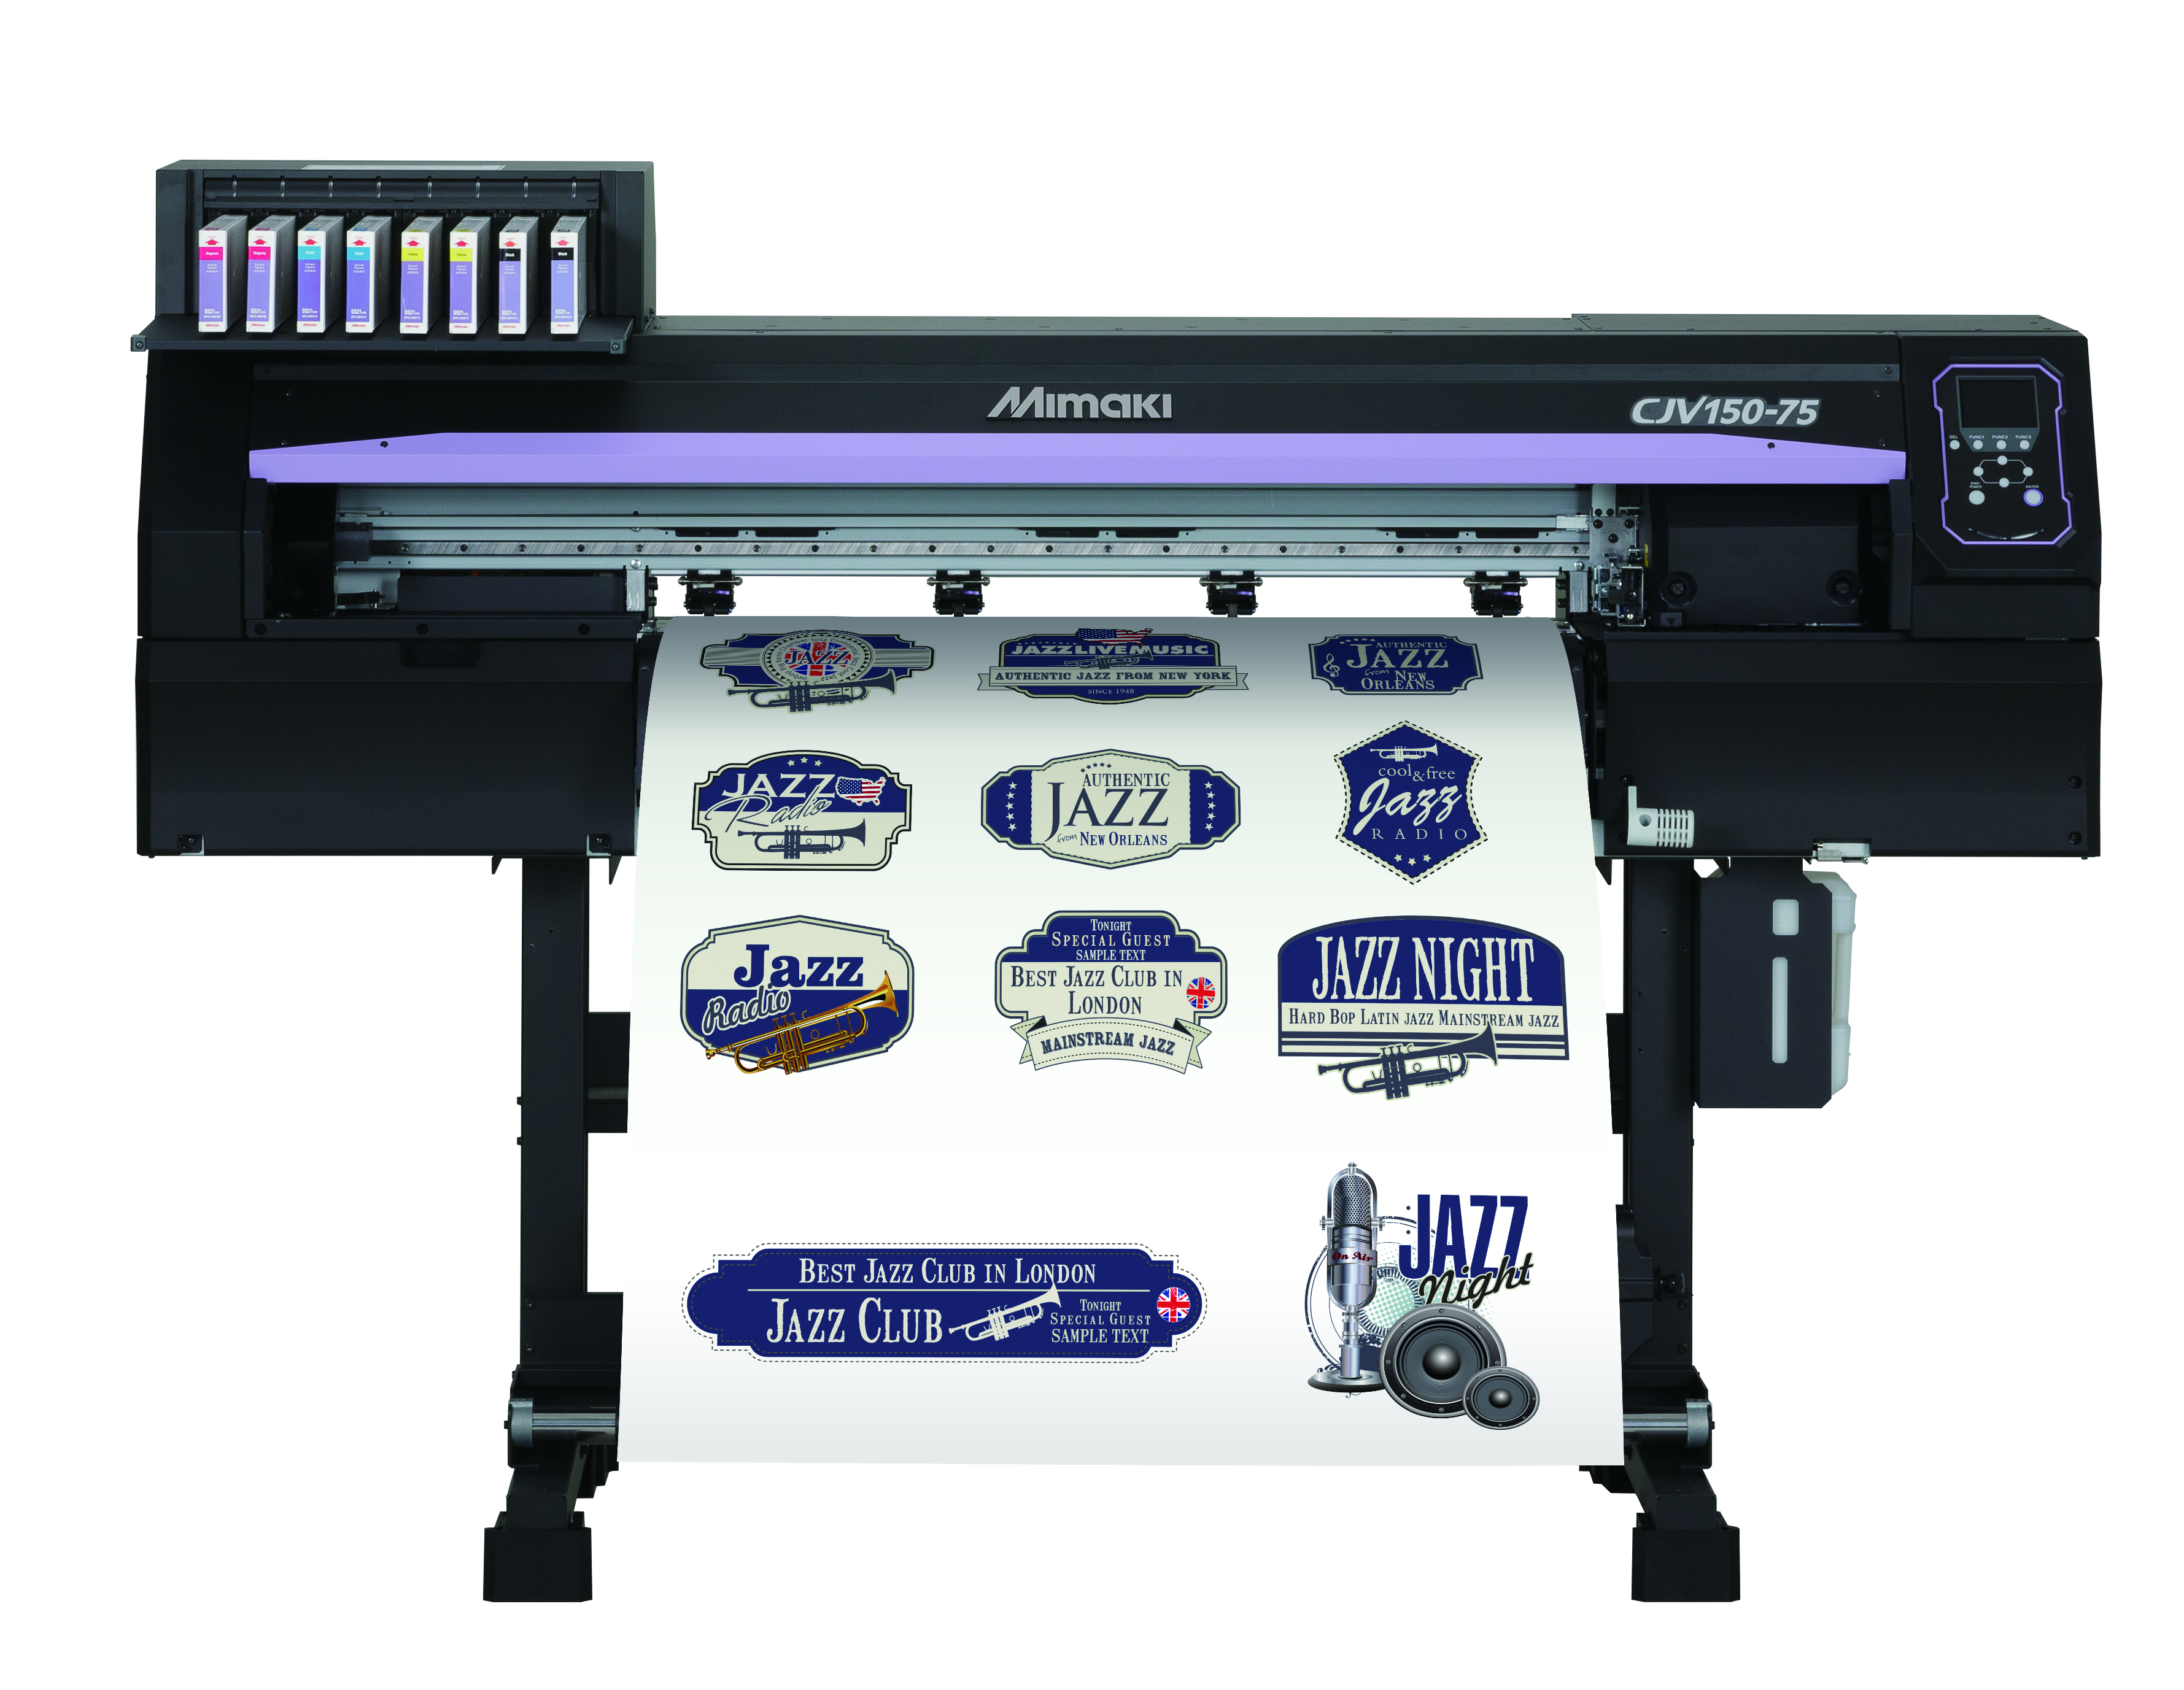 The smallest of Mimaki’s new printer cutters is the CJV150-75